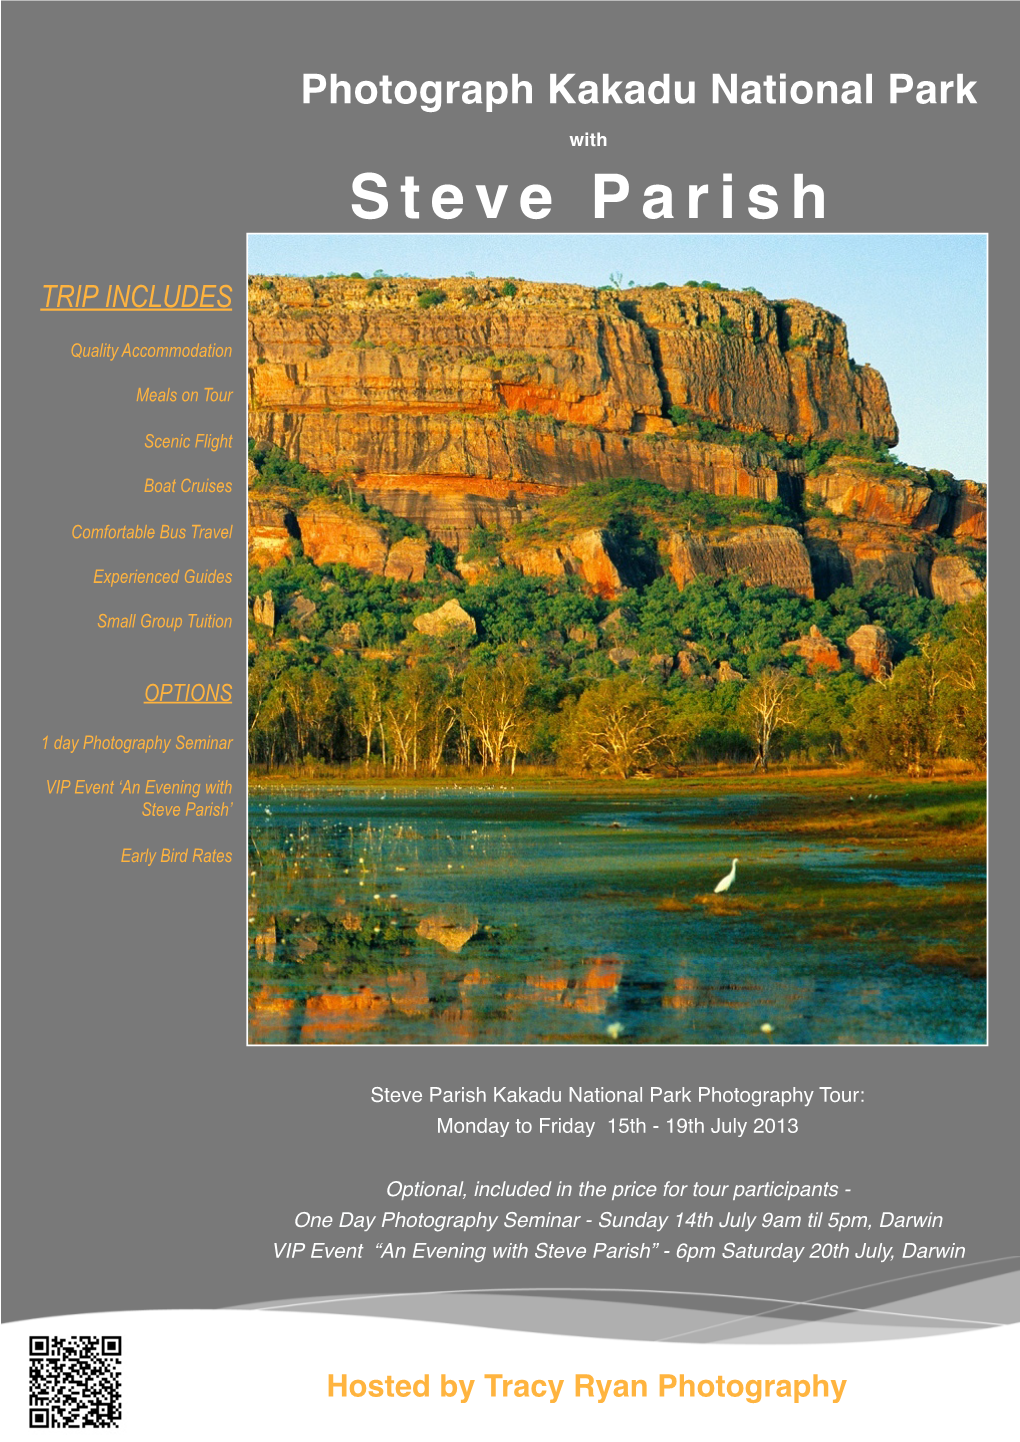 Photograph Kakadu National Park with Steve Parish’ and Be Your Tour Leader on This Amazing Journey